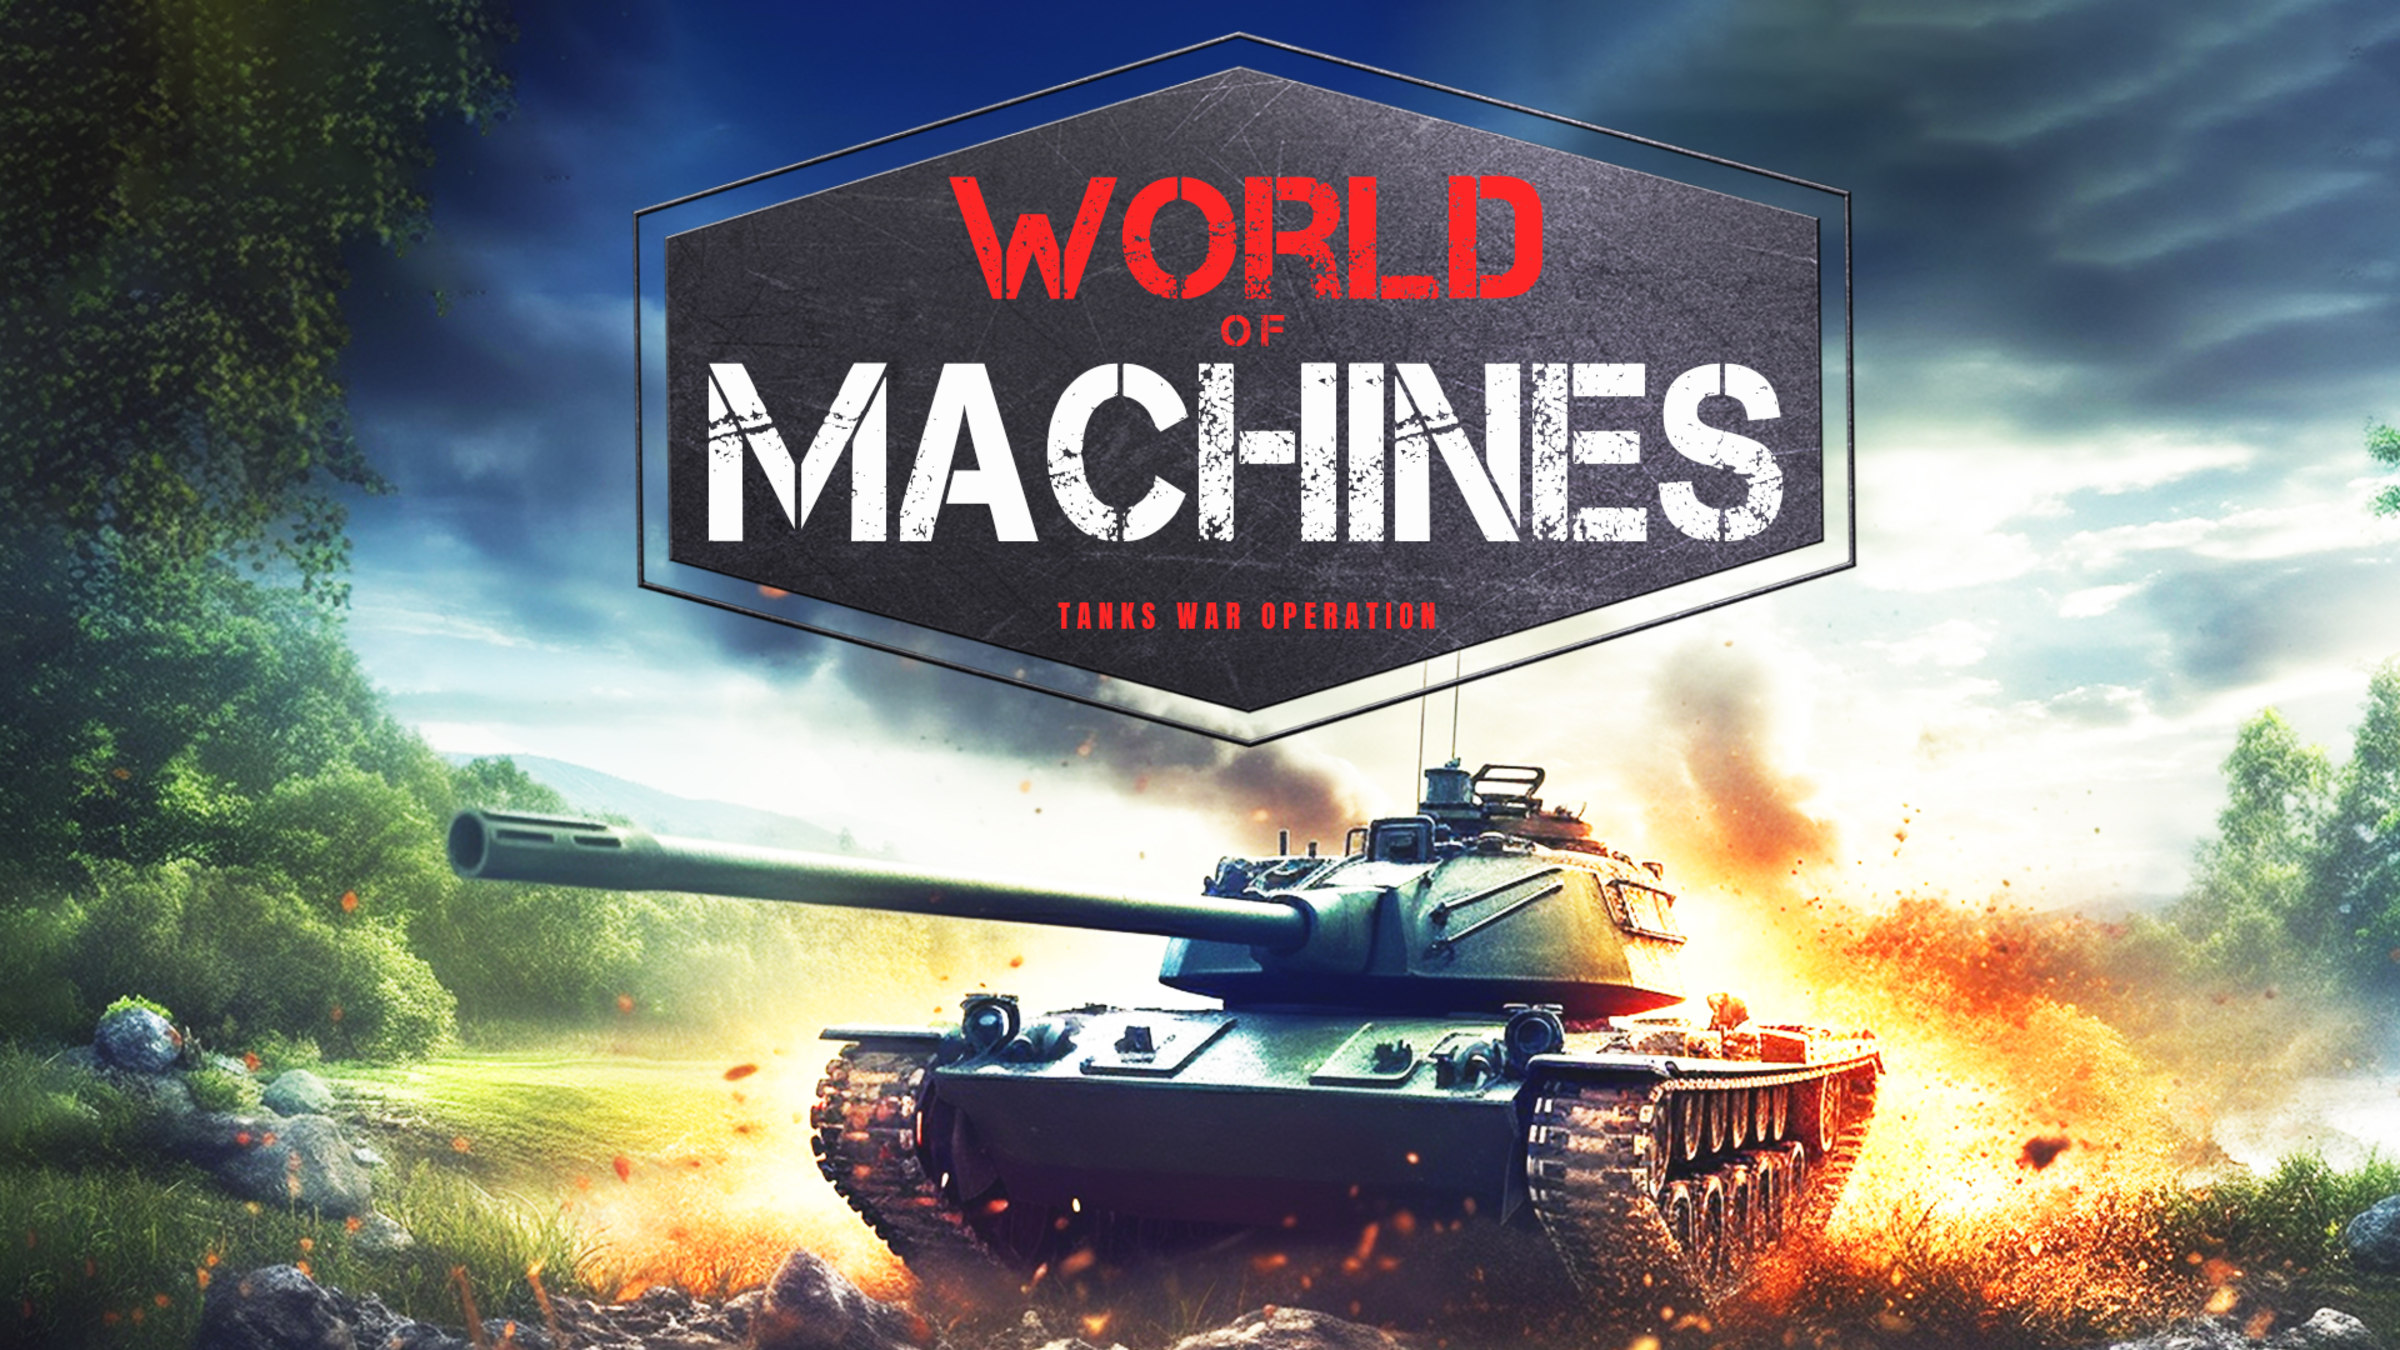 War Tank Machine Battle Vehicle Simulator - Fight World Wars WWII Mechanic  Troopers Royale Driving for Nintendo Switch - Nintendo Official Site